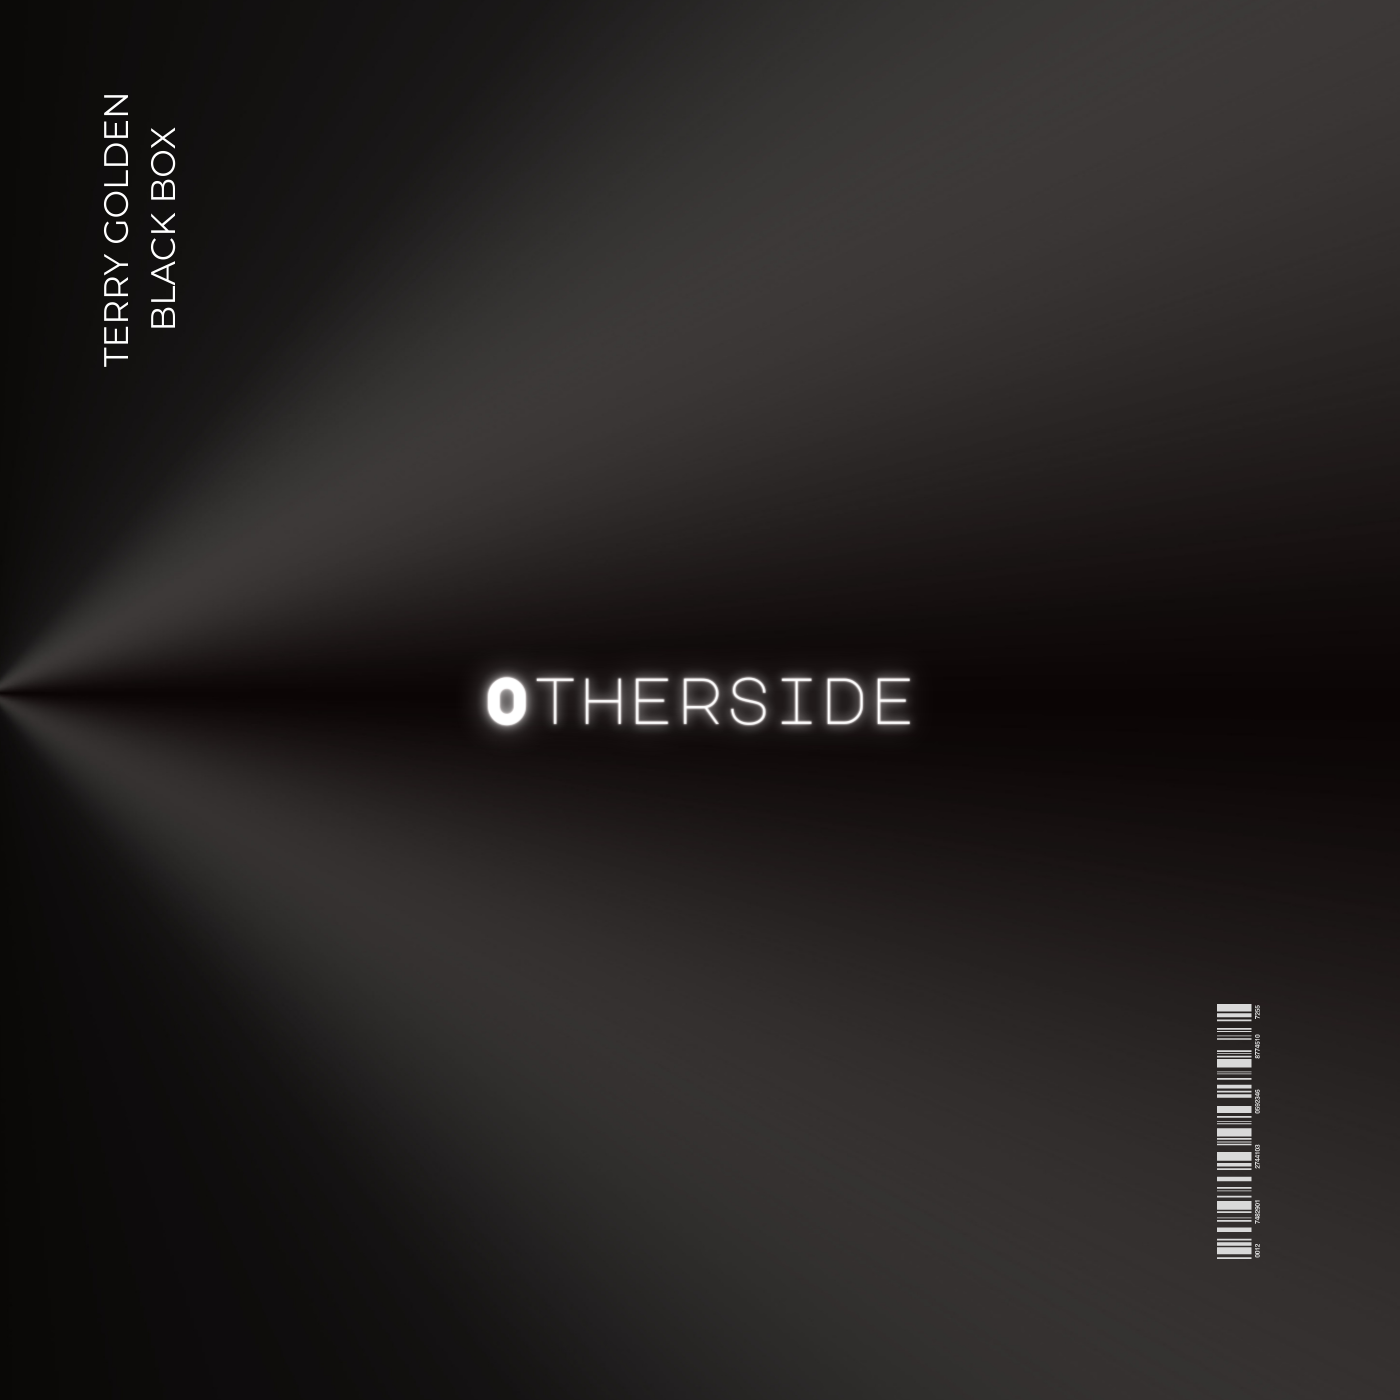 Terry Golden's Latest Release 'Otherside' Promises High-Octane Energy and Party Vibes